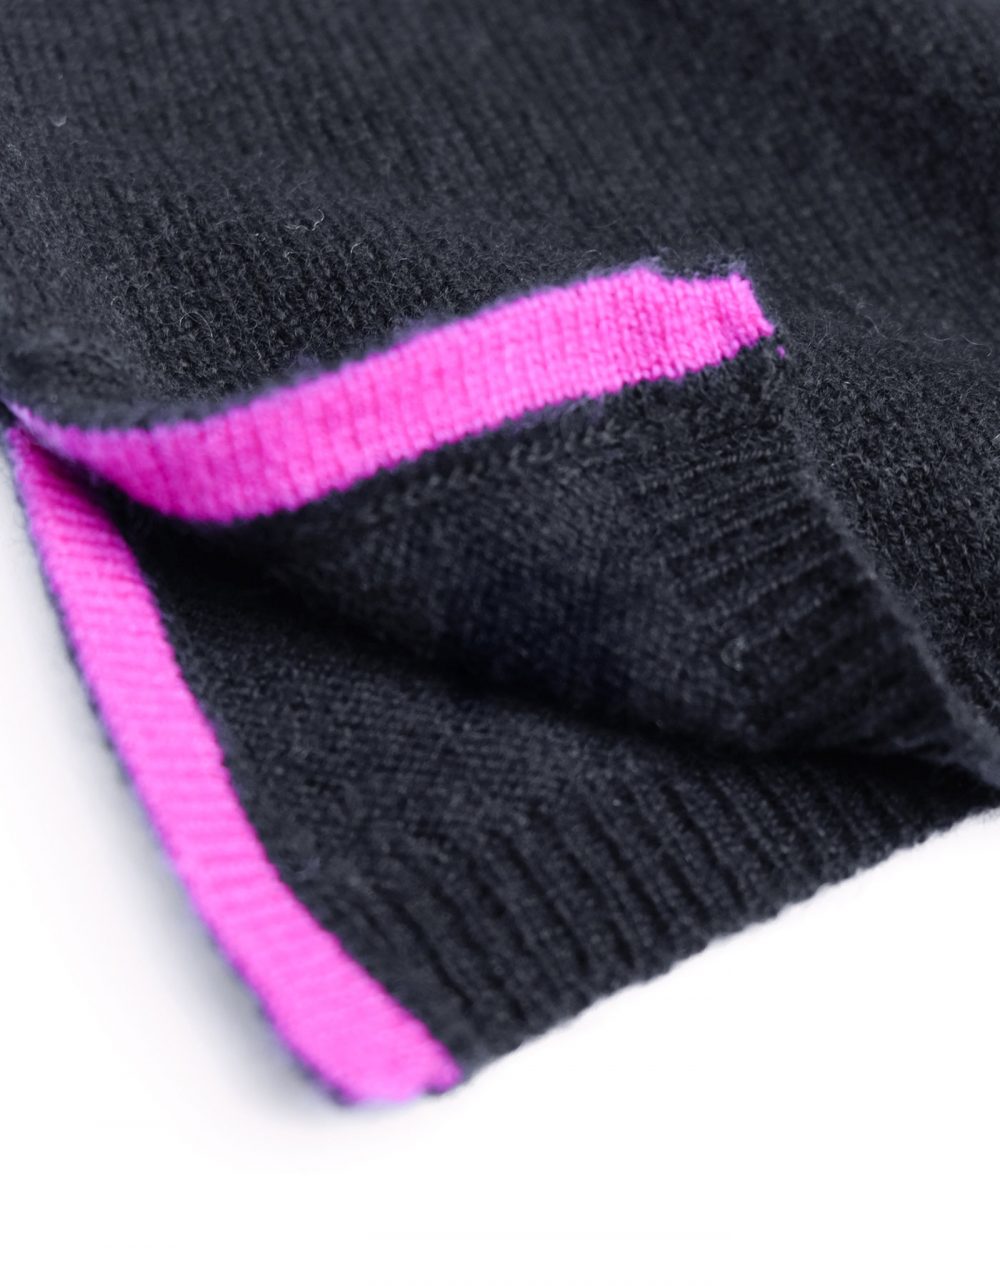 Zoomed detail of cashmere knitwear showing intarsia knit black cashmere with pink highlights.